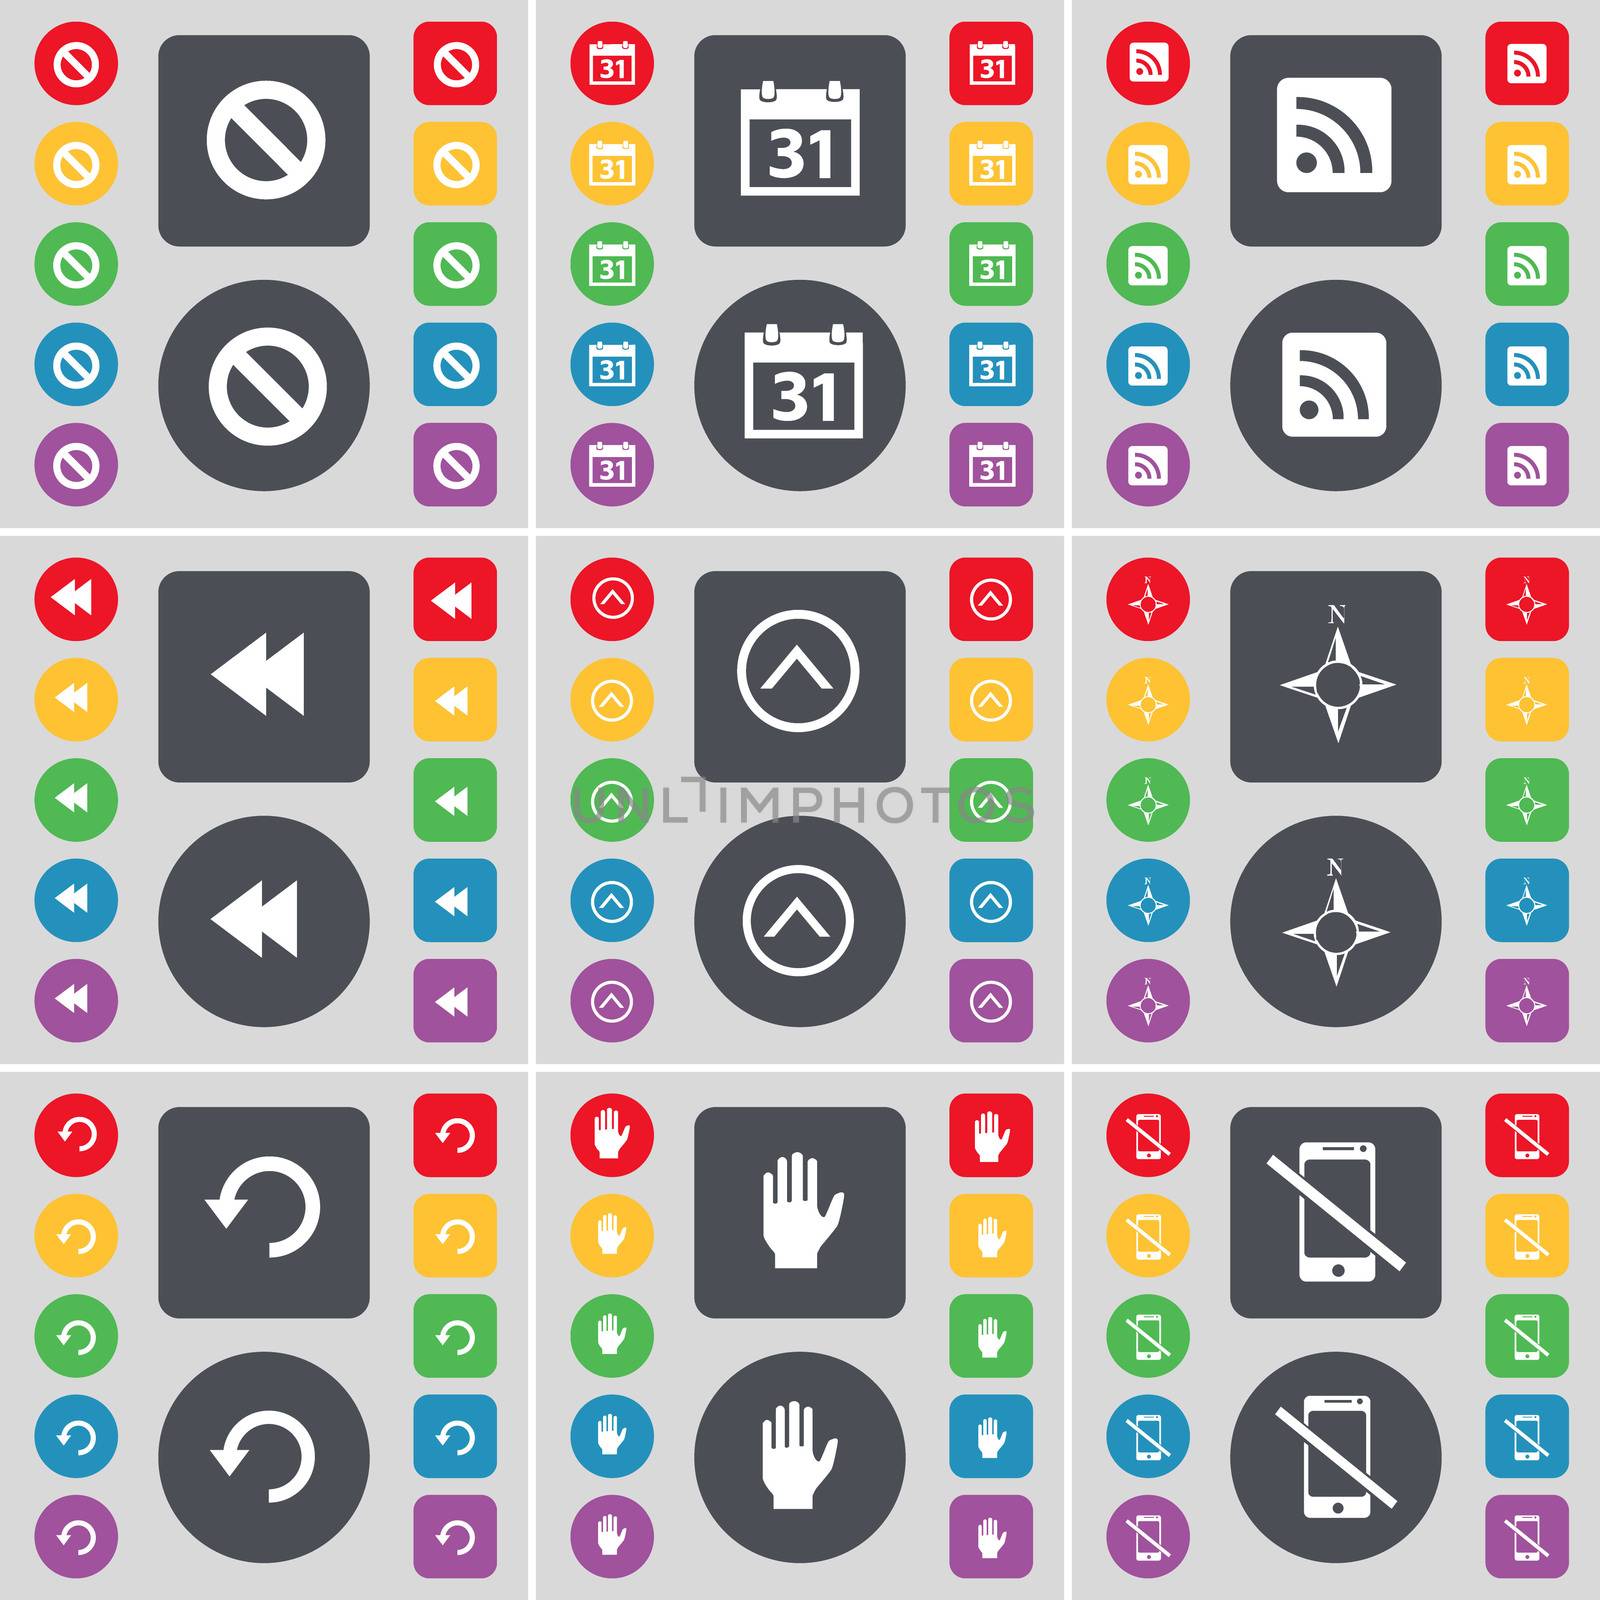 Stop, Calendar, RSS, Rewind, Arrow up, Compass, Reload, Hand, Smartphone icon symbol. A large set of flat, colored buttons for your design. illustration